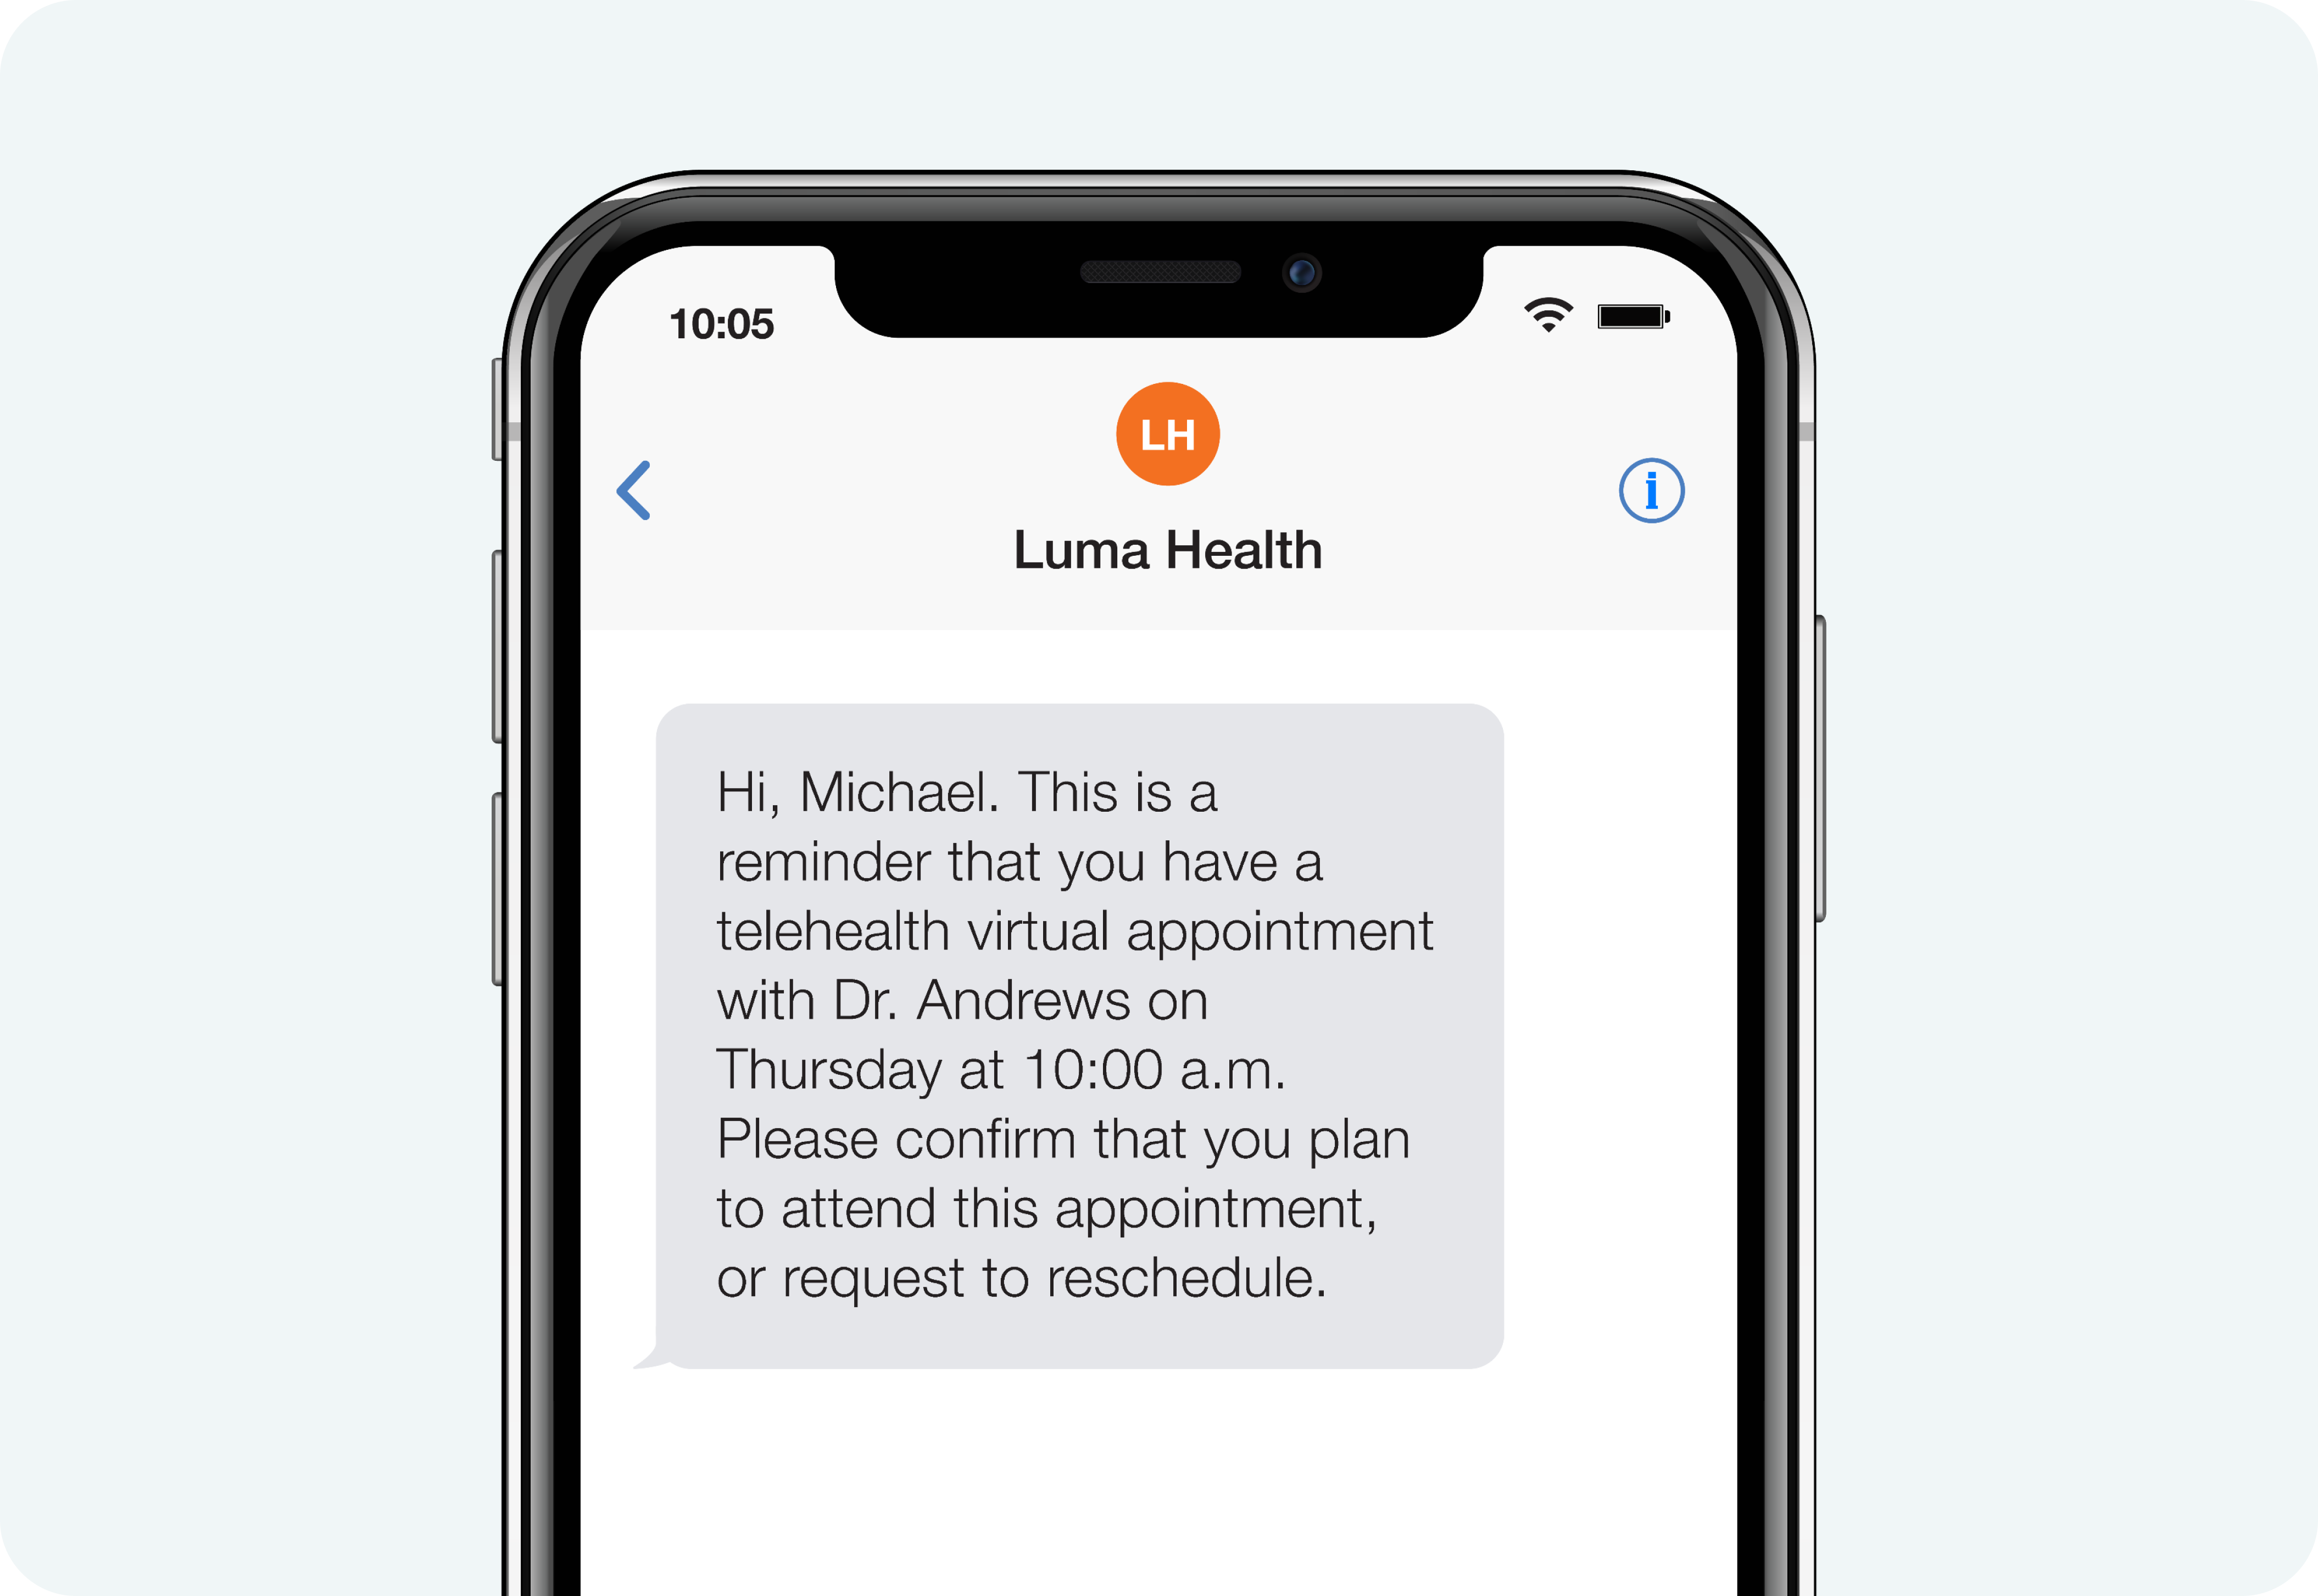 SMS appointment reminder to schedule telehealth visit 